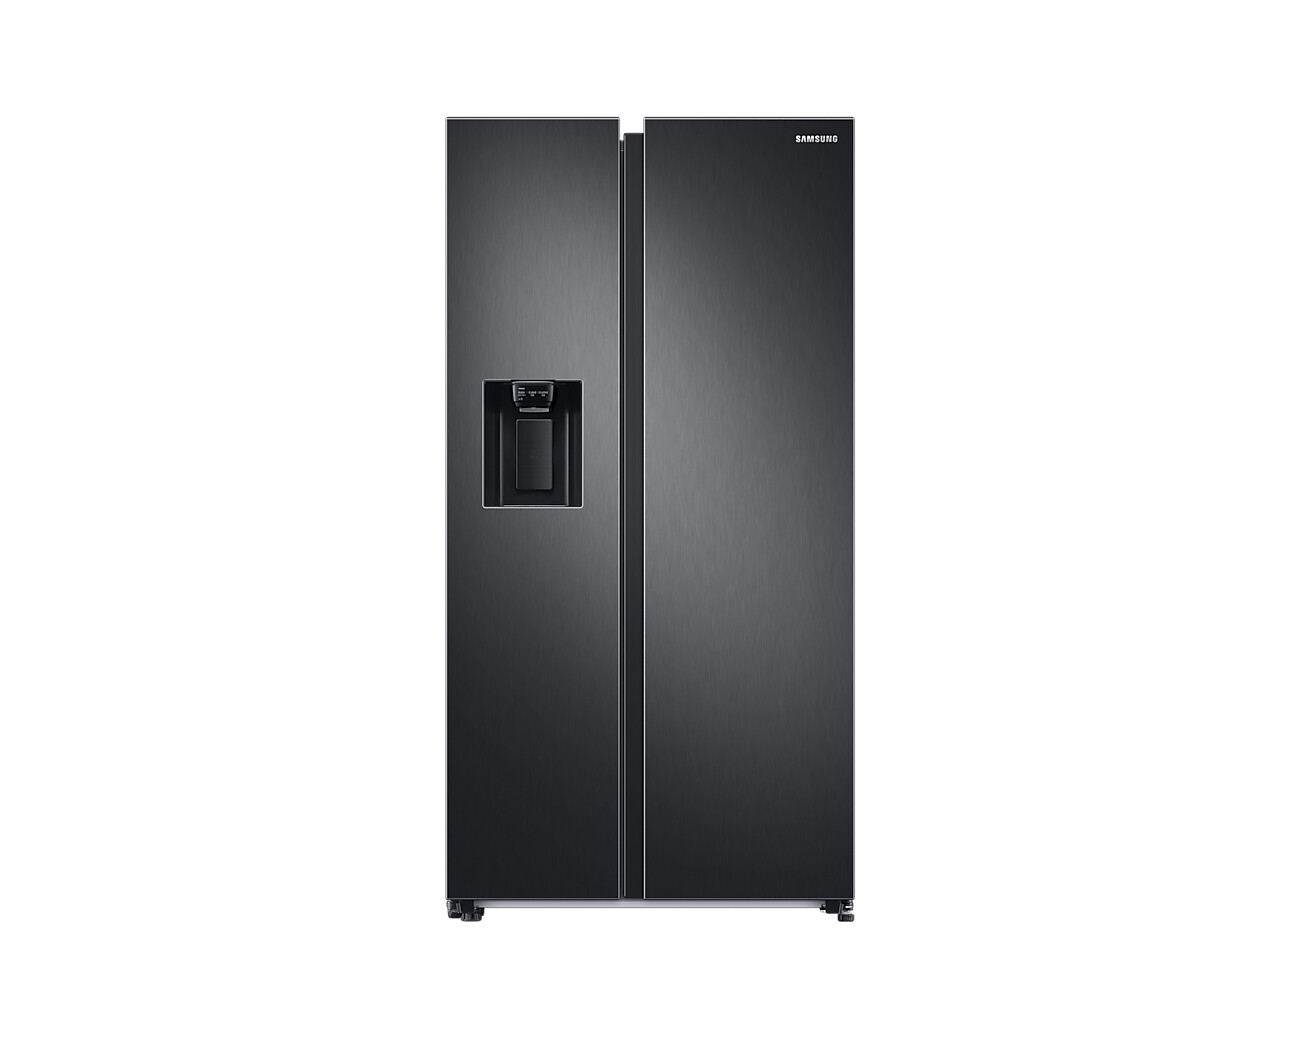 Samsung Series 8 RS68A884CB1 Plumbed Frost Free American Fridge Freezer – Black – C Rated #364552